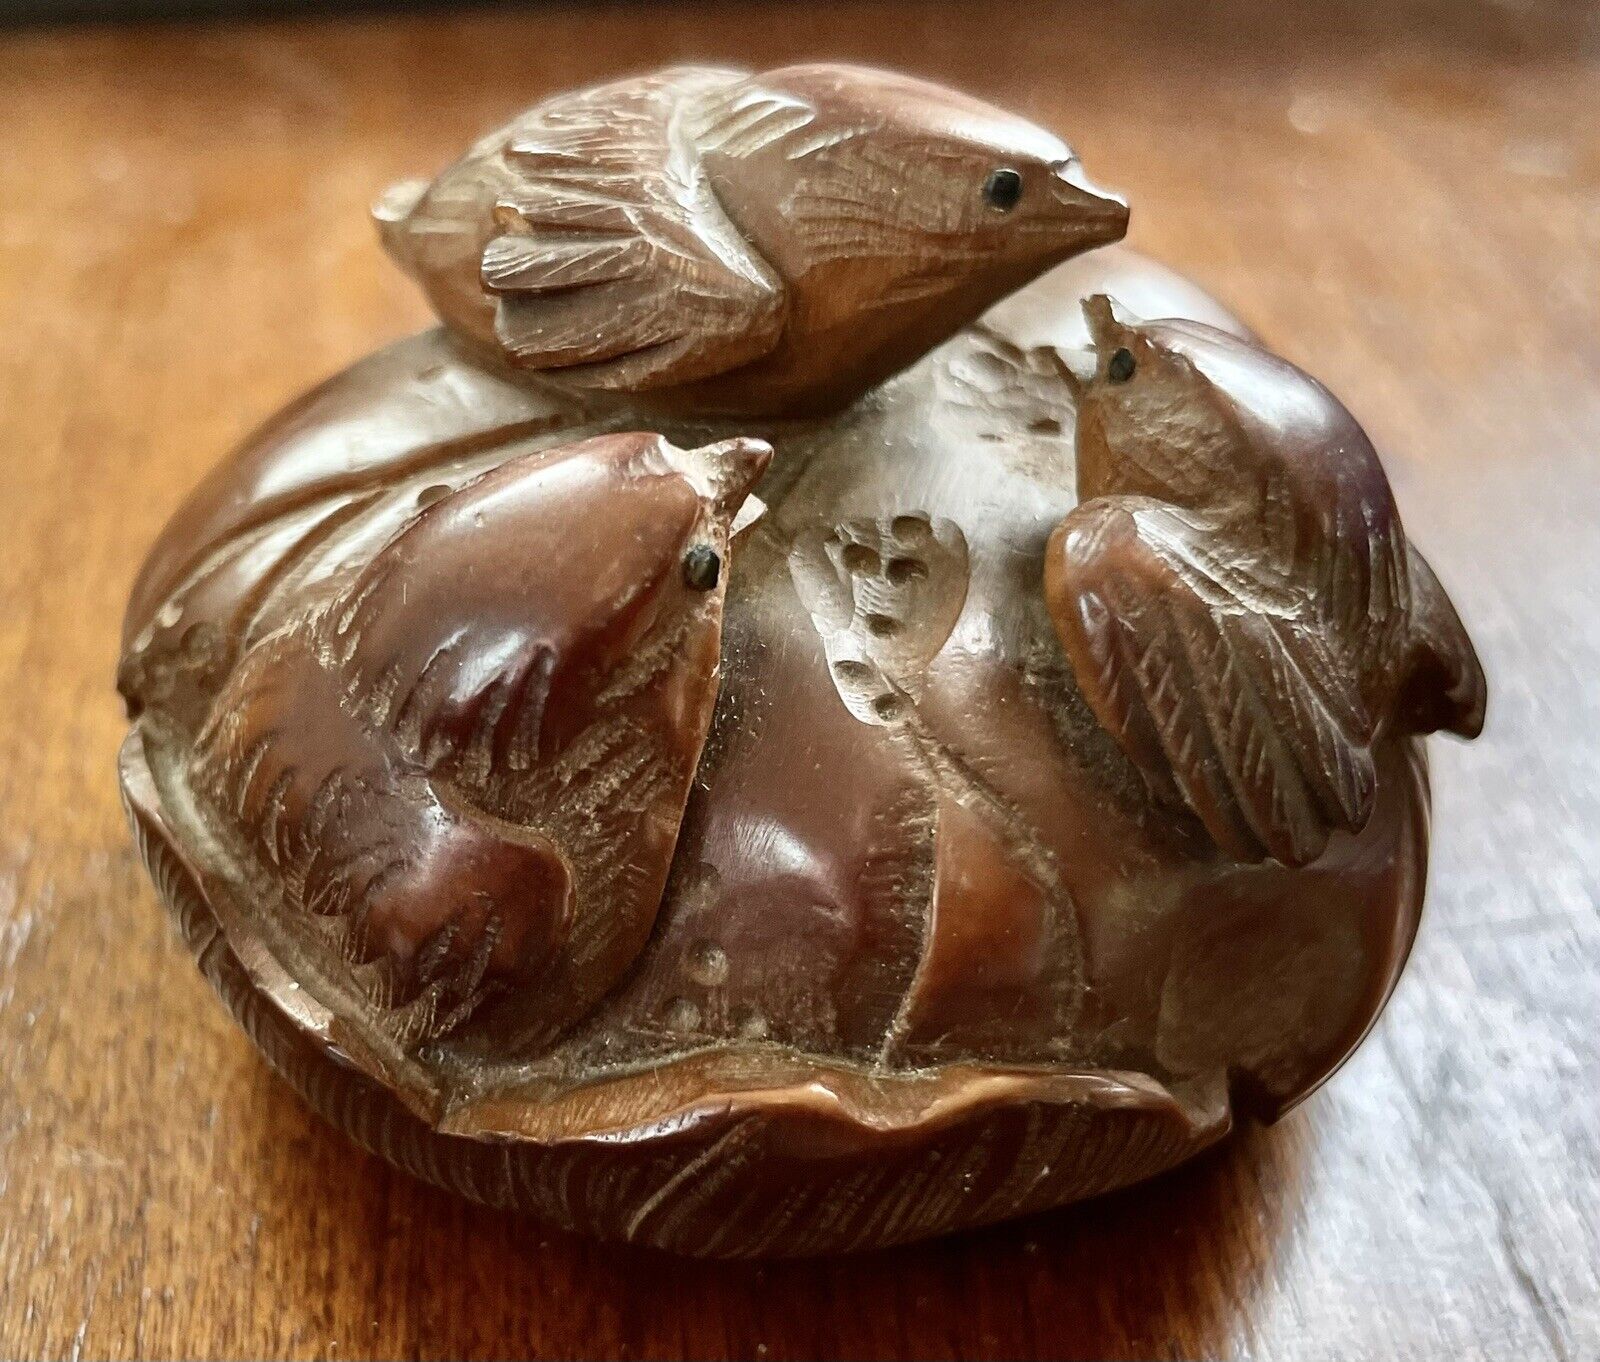 Delightful Tiny Vintage Japanese Wood Carving of Three Birds on a Fruit, 20th C.